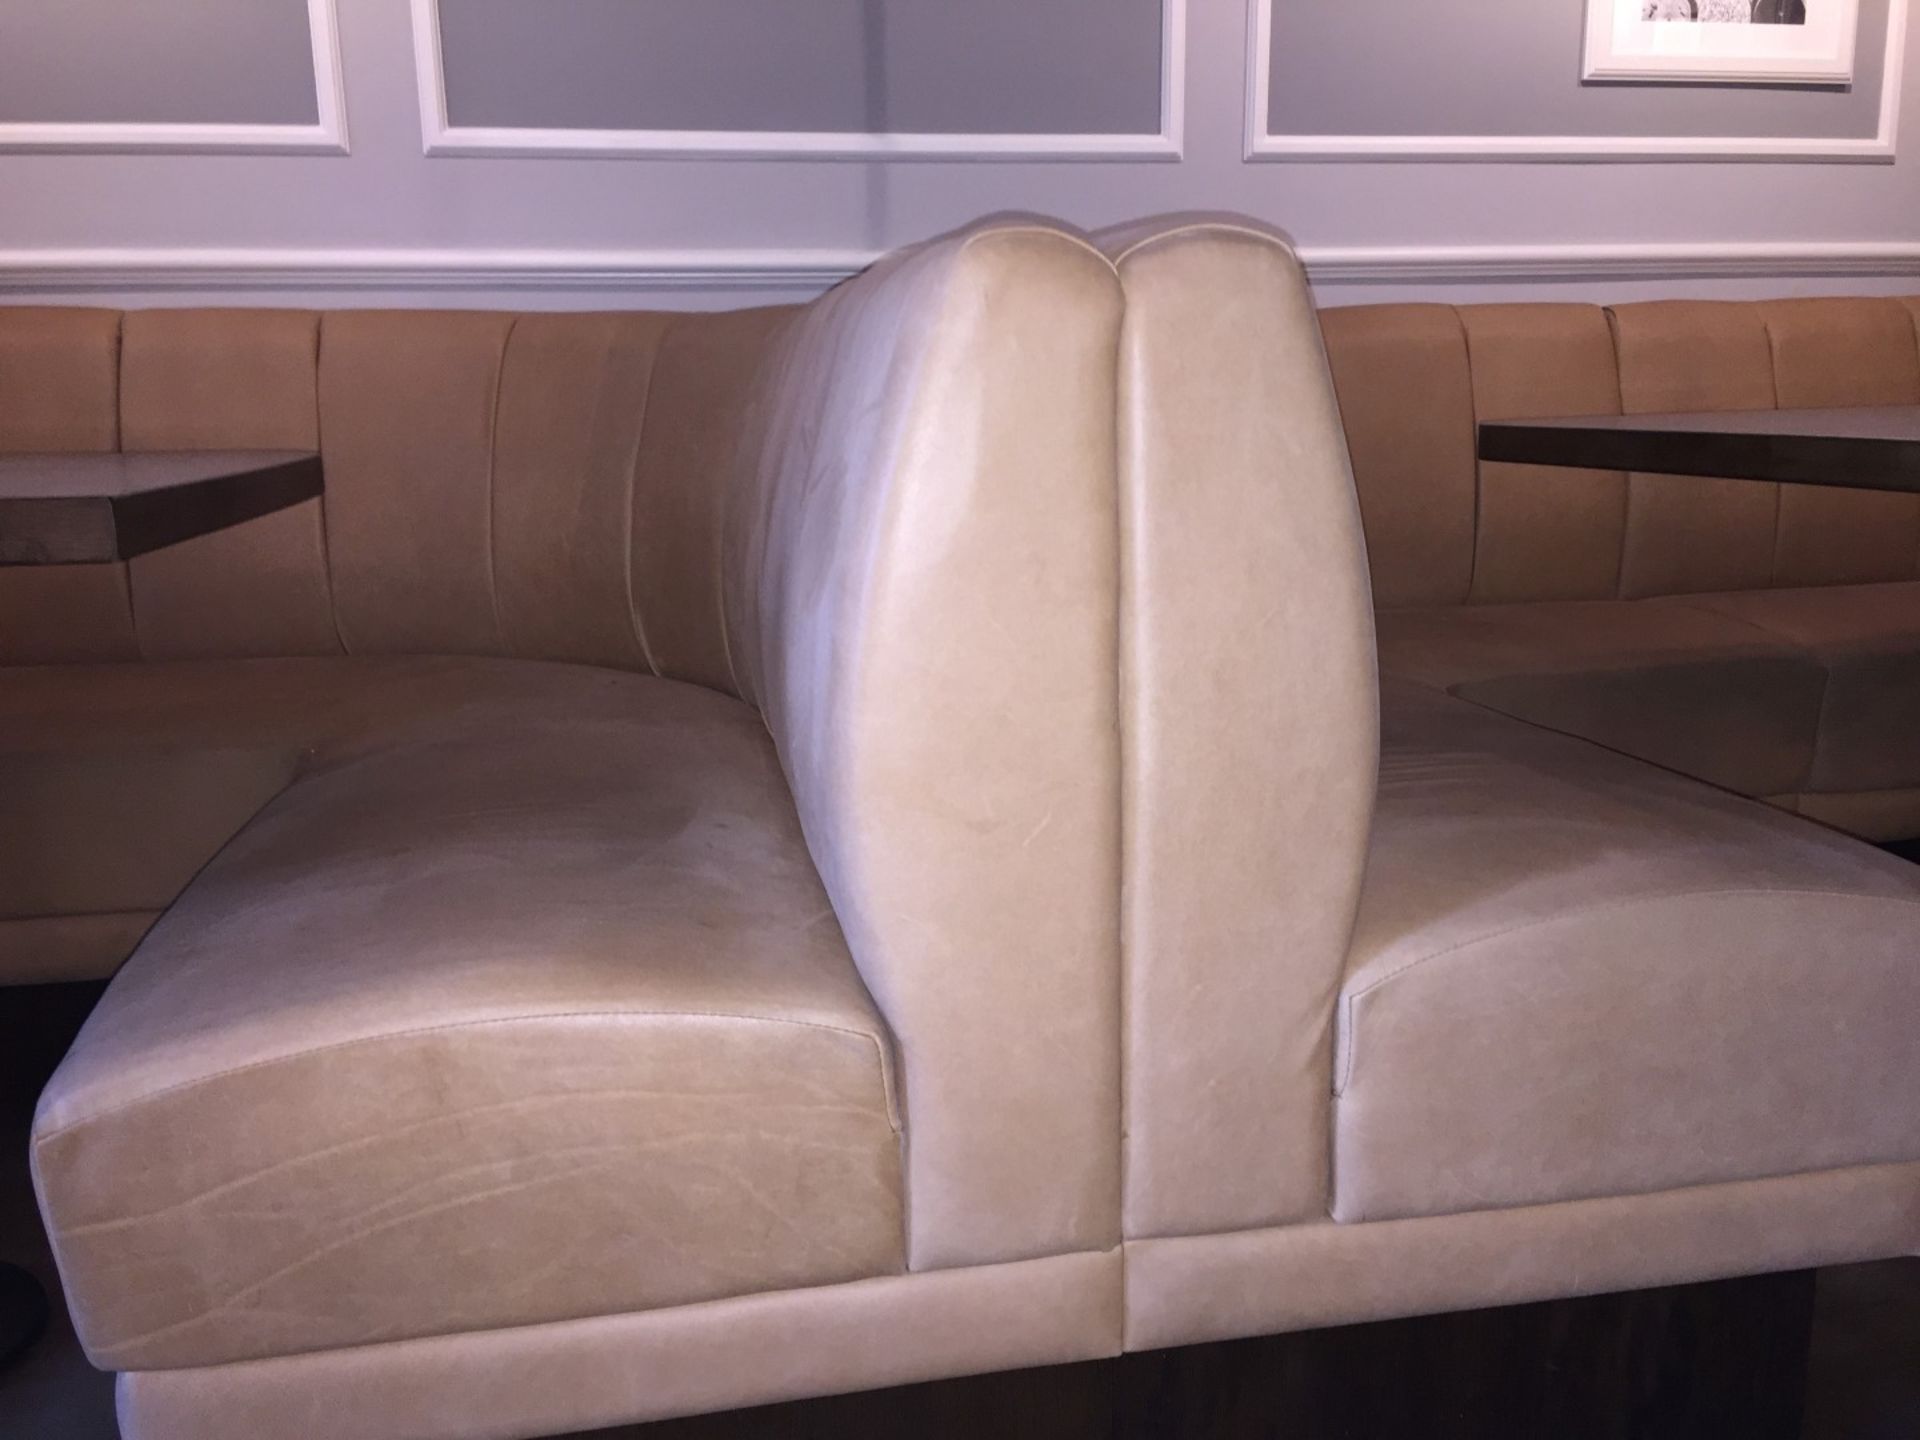 1 x Luxurious High End Curved Seating Booth - Tastefully Upholstered In Cream Leather with - Image 8 of 14